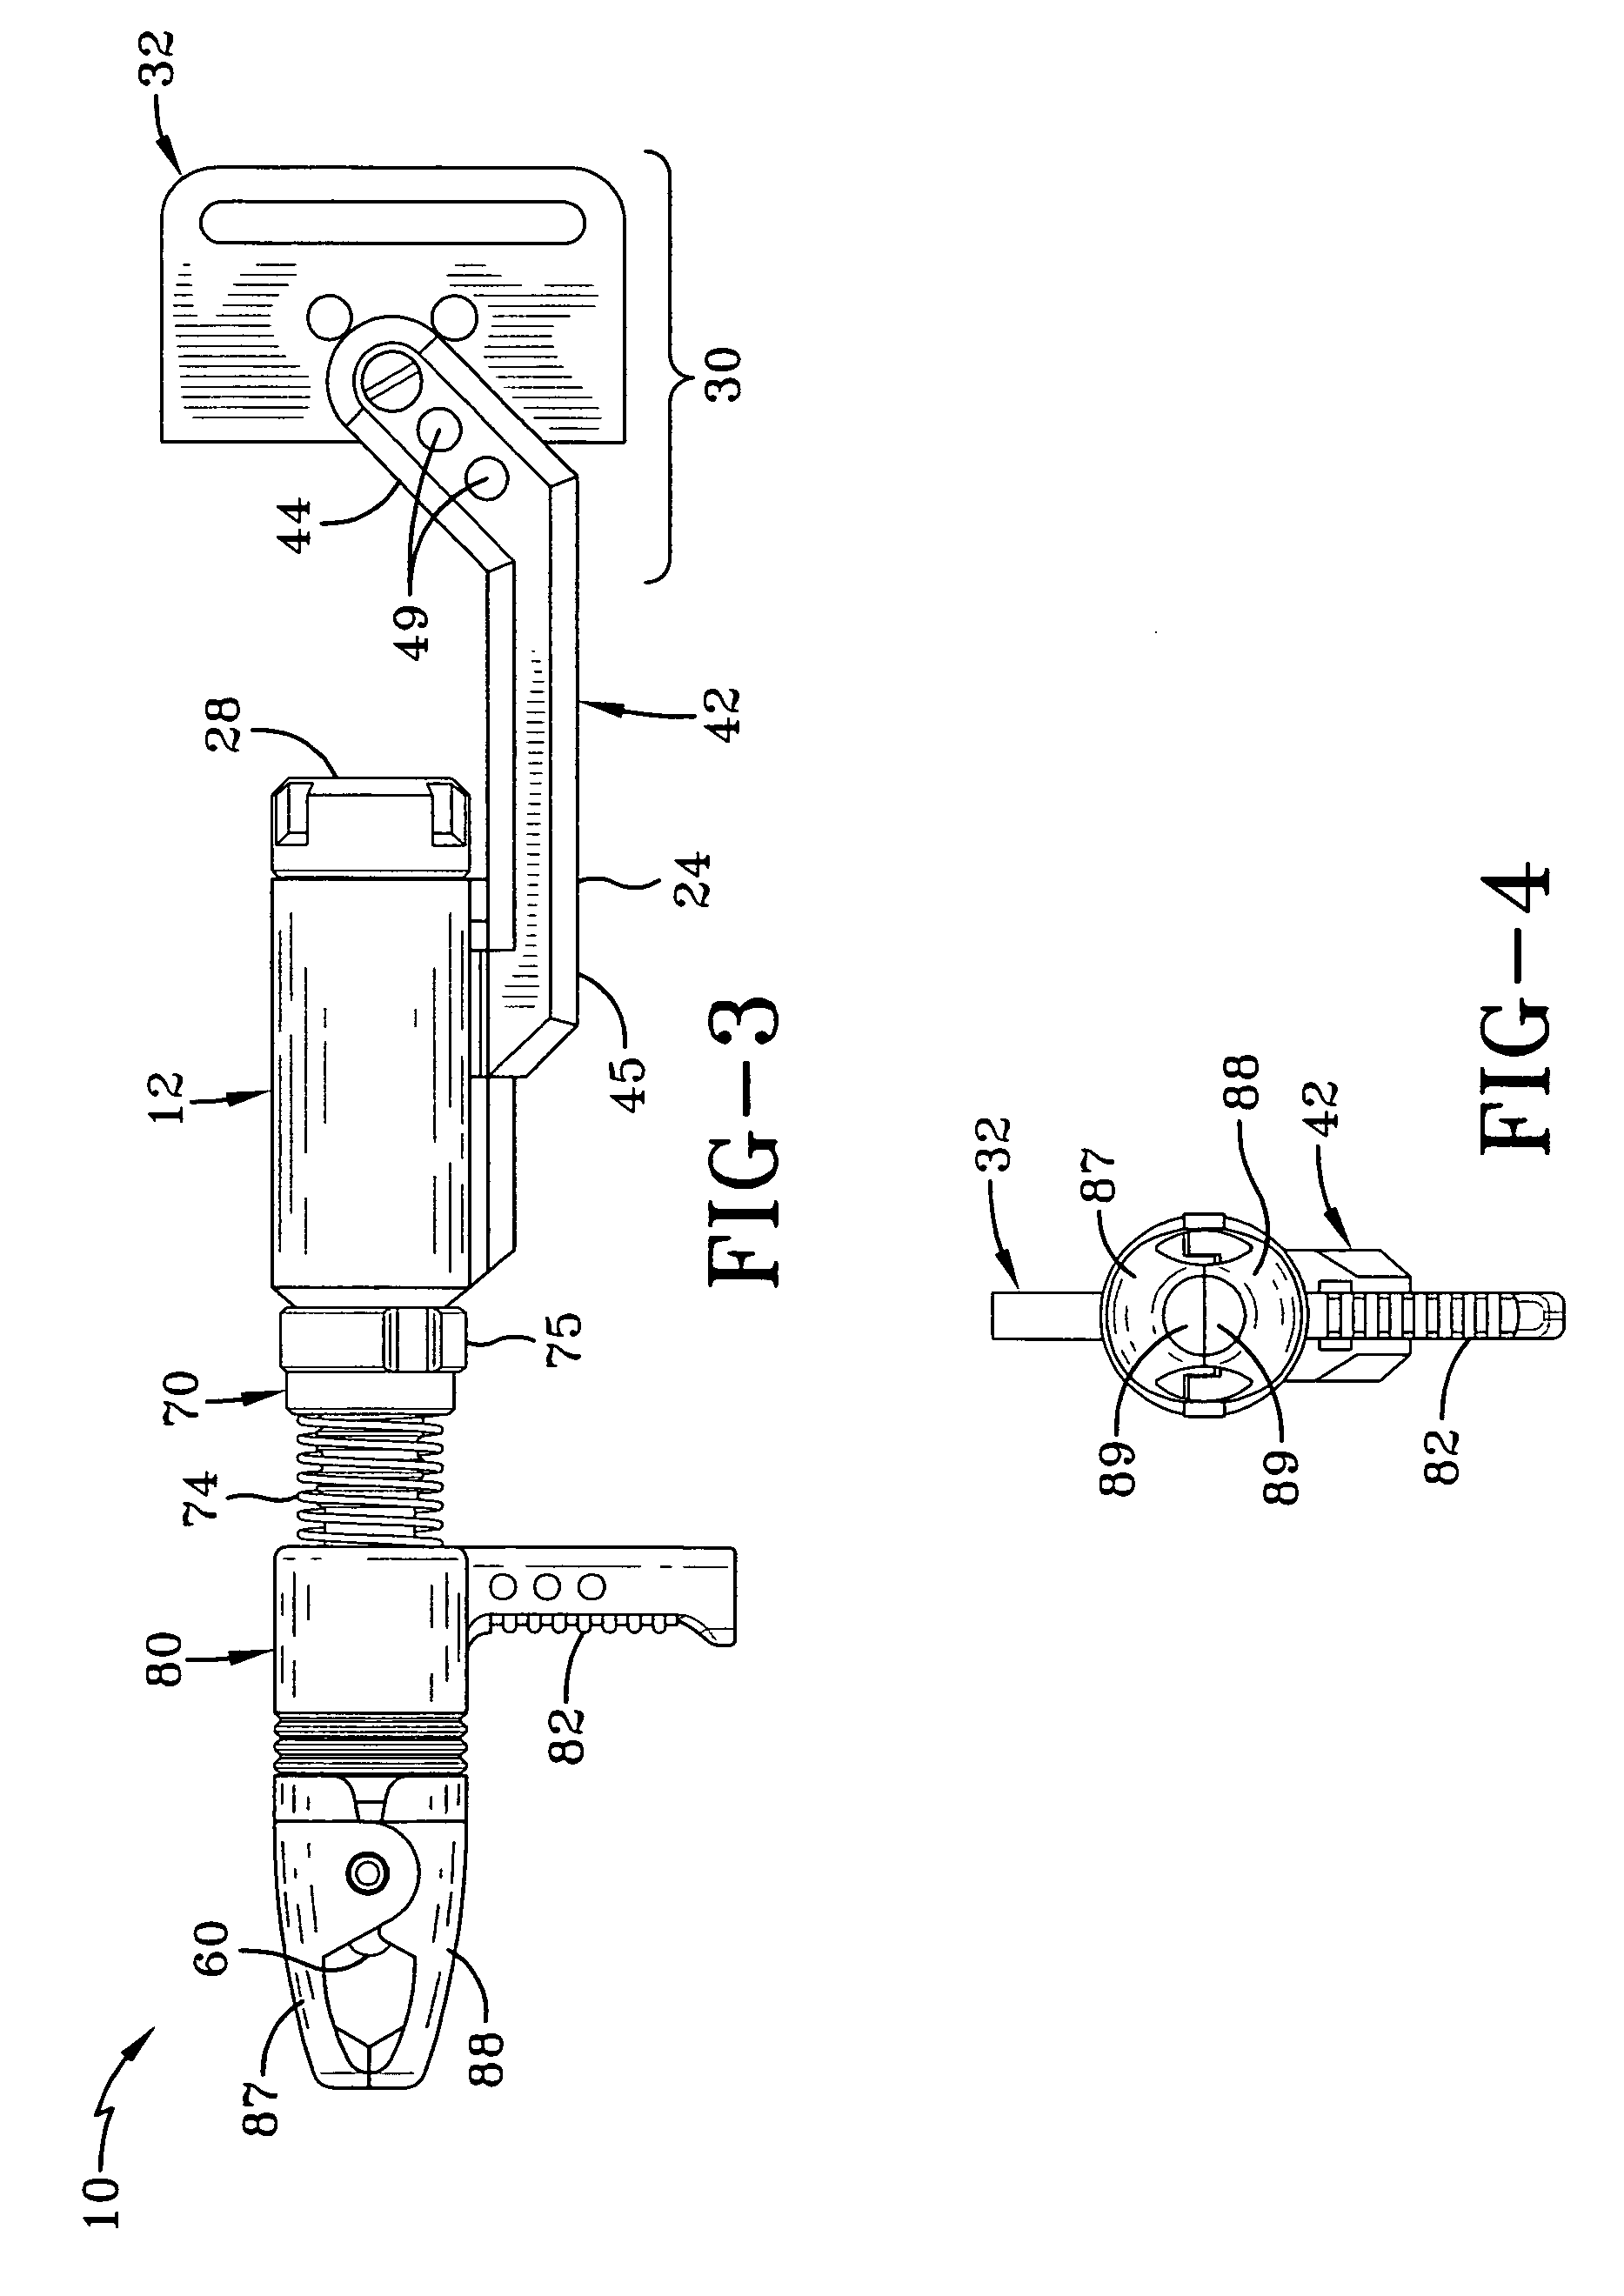 Archery lighted release aid apparatus